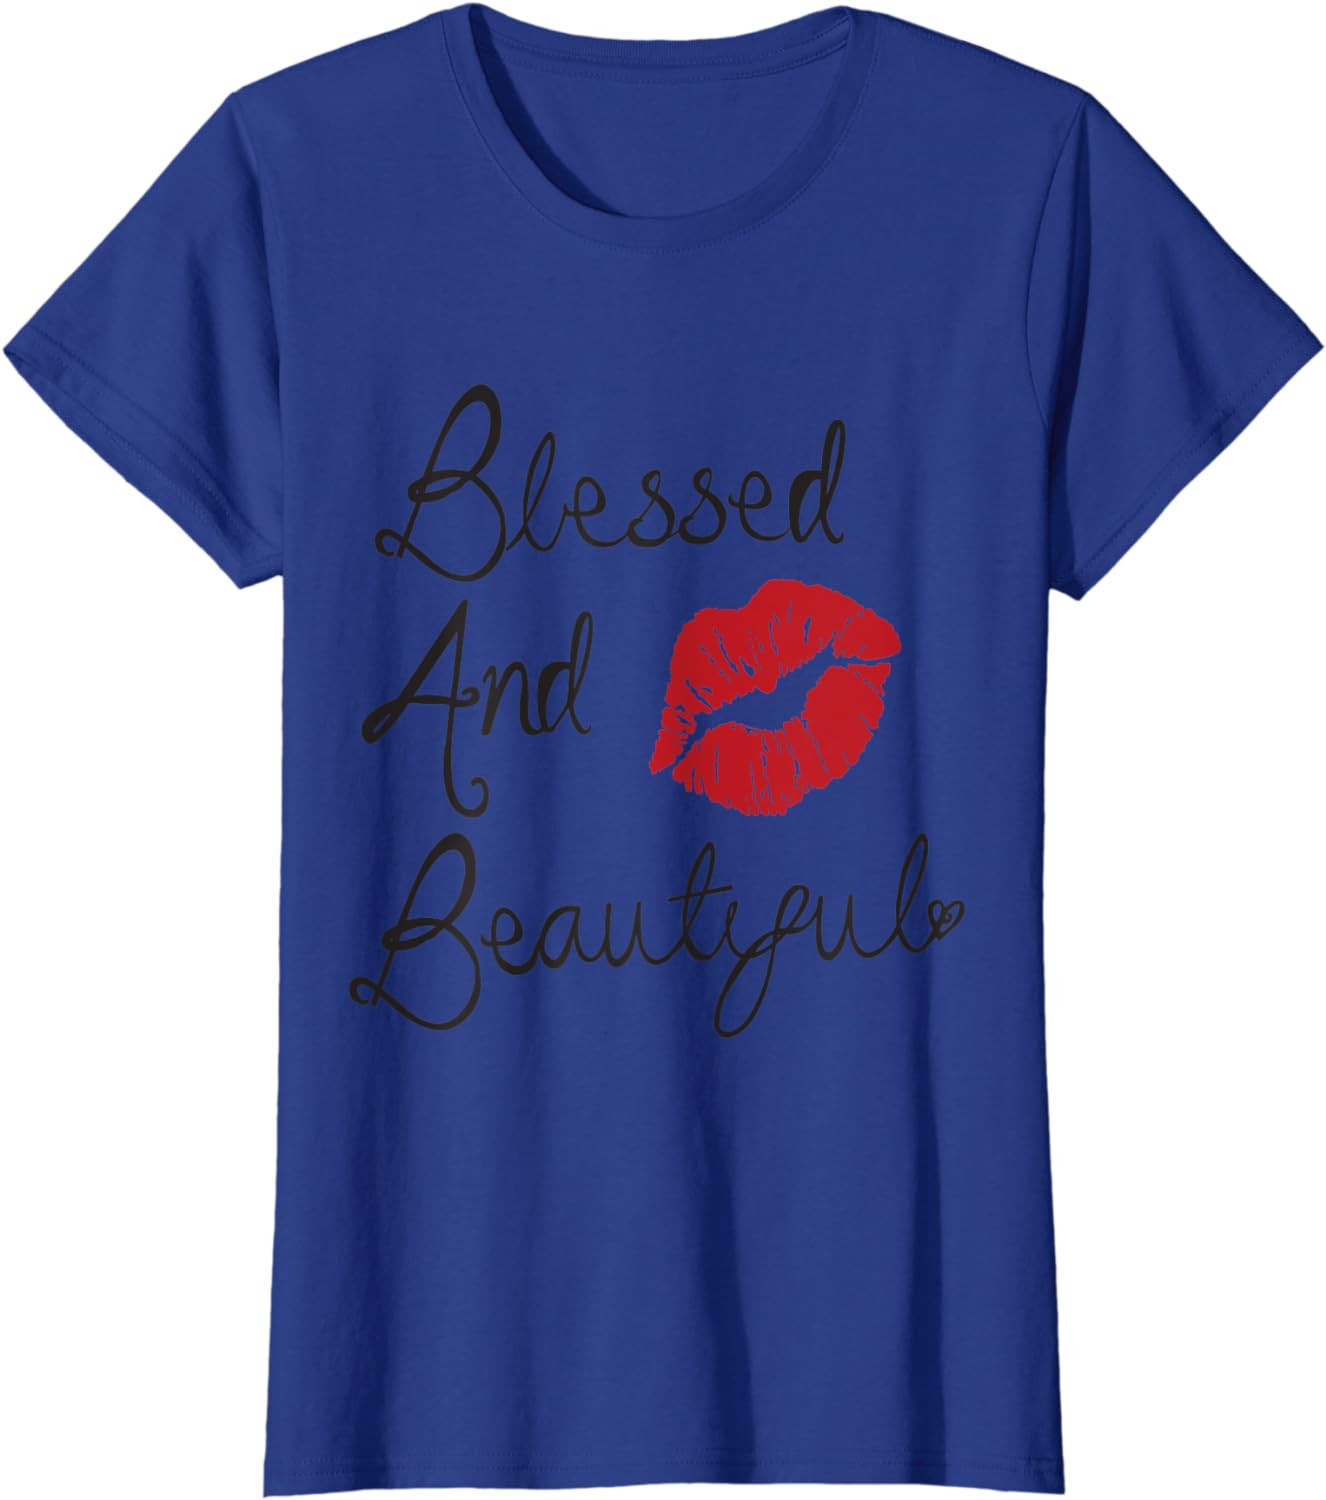 Womens 'Blessed And Beautiful' T-Shirt